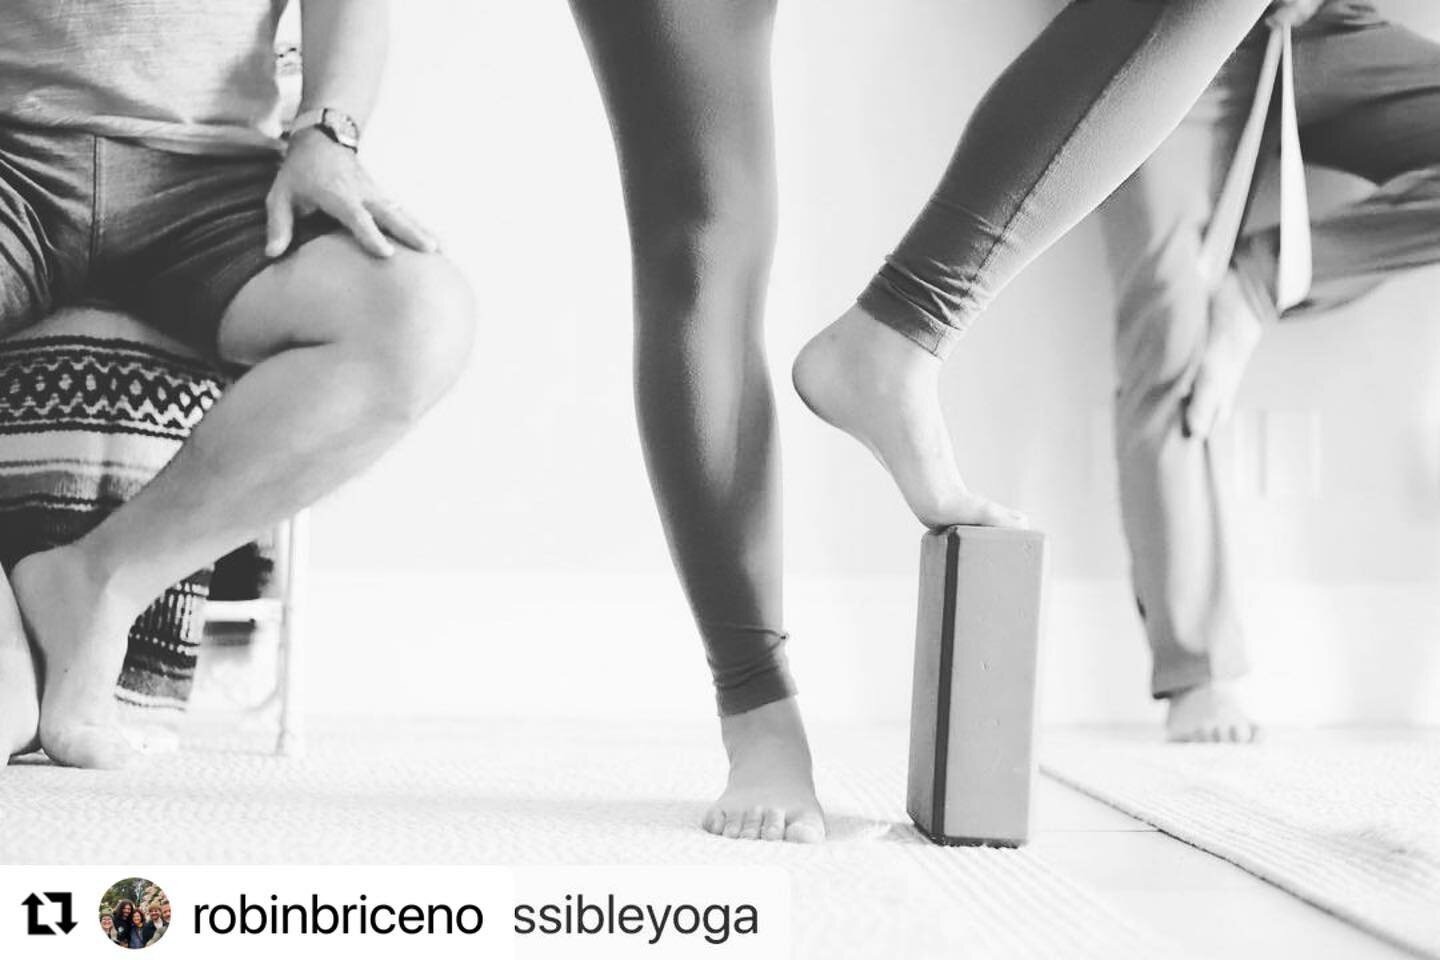 #Repost @robinbriceno with @use.repost
・・・
#Repost @harmonyaccessibleyoga with @use.repost
・・・
Virtual Accessible Yoga practices for calming your mind and bringing a deeper connection to your breath, enhancing your inner &amp; outer flexibility, stre